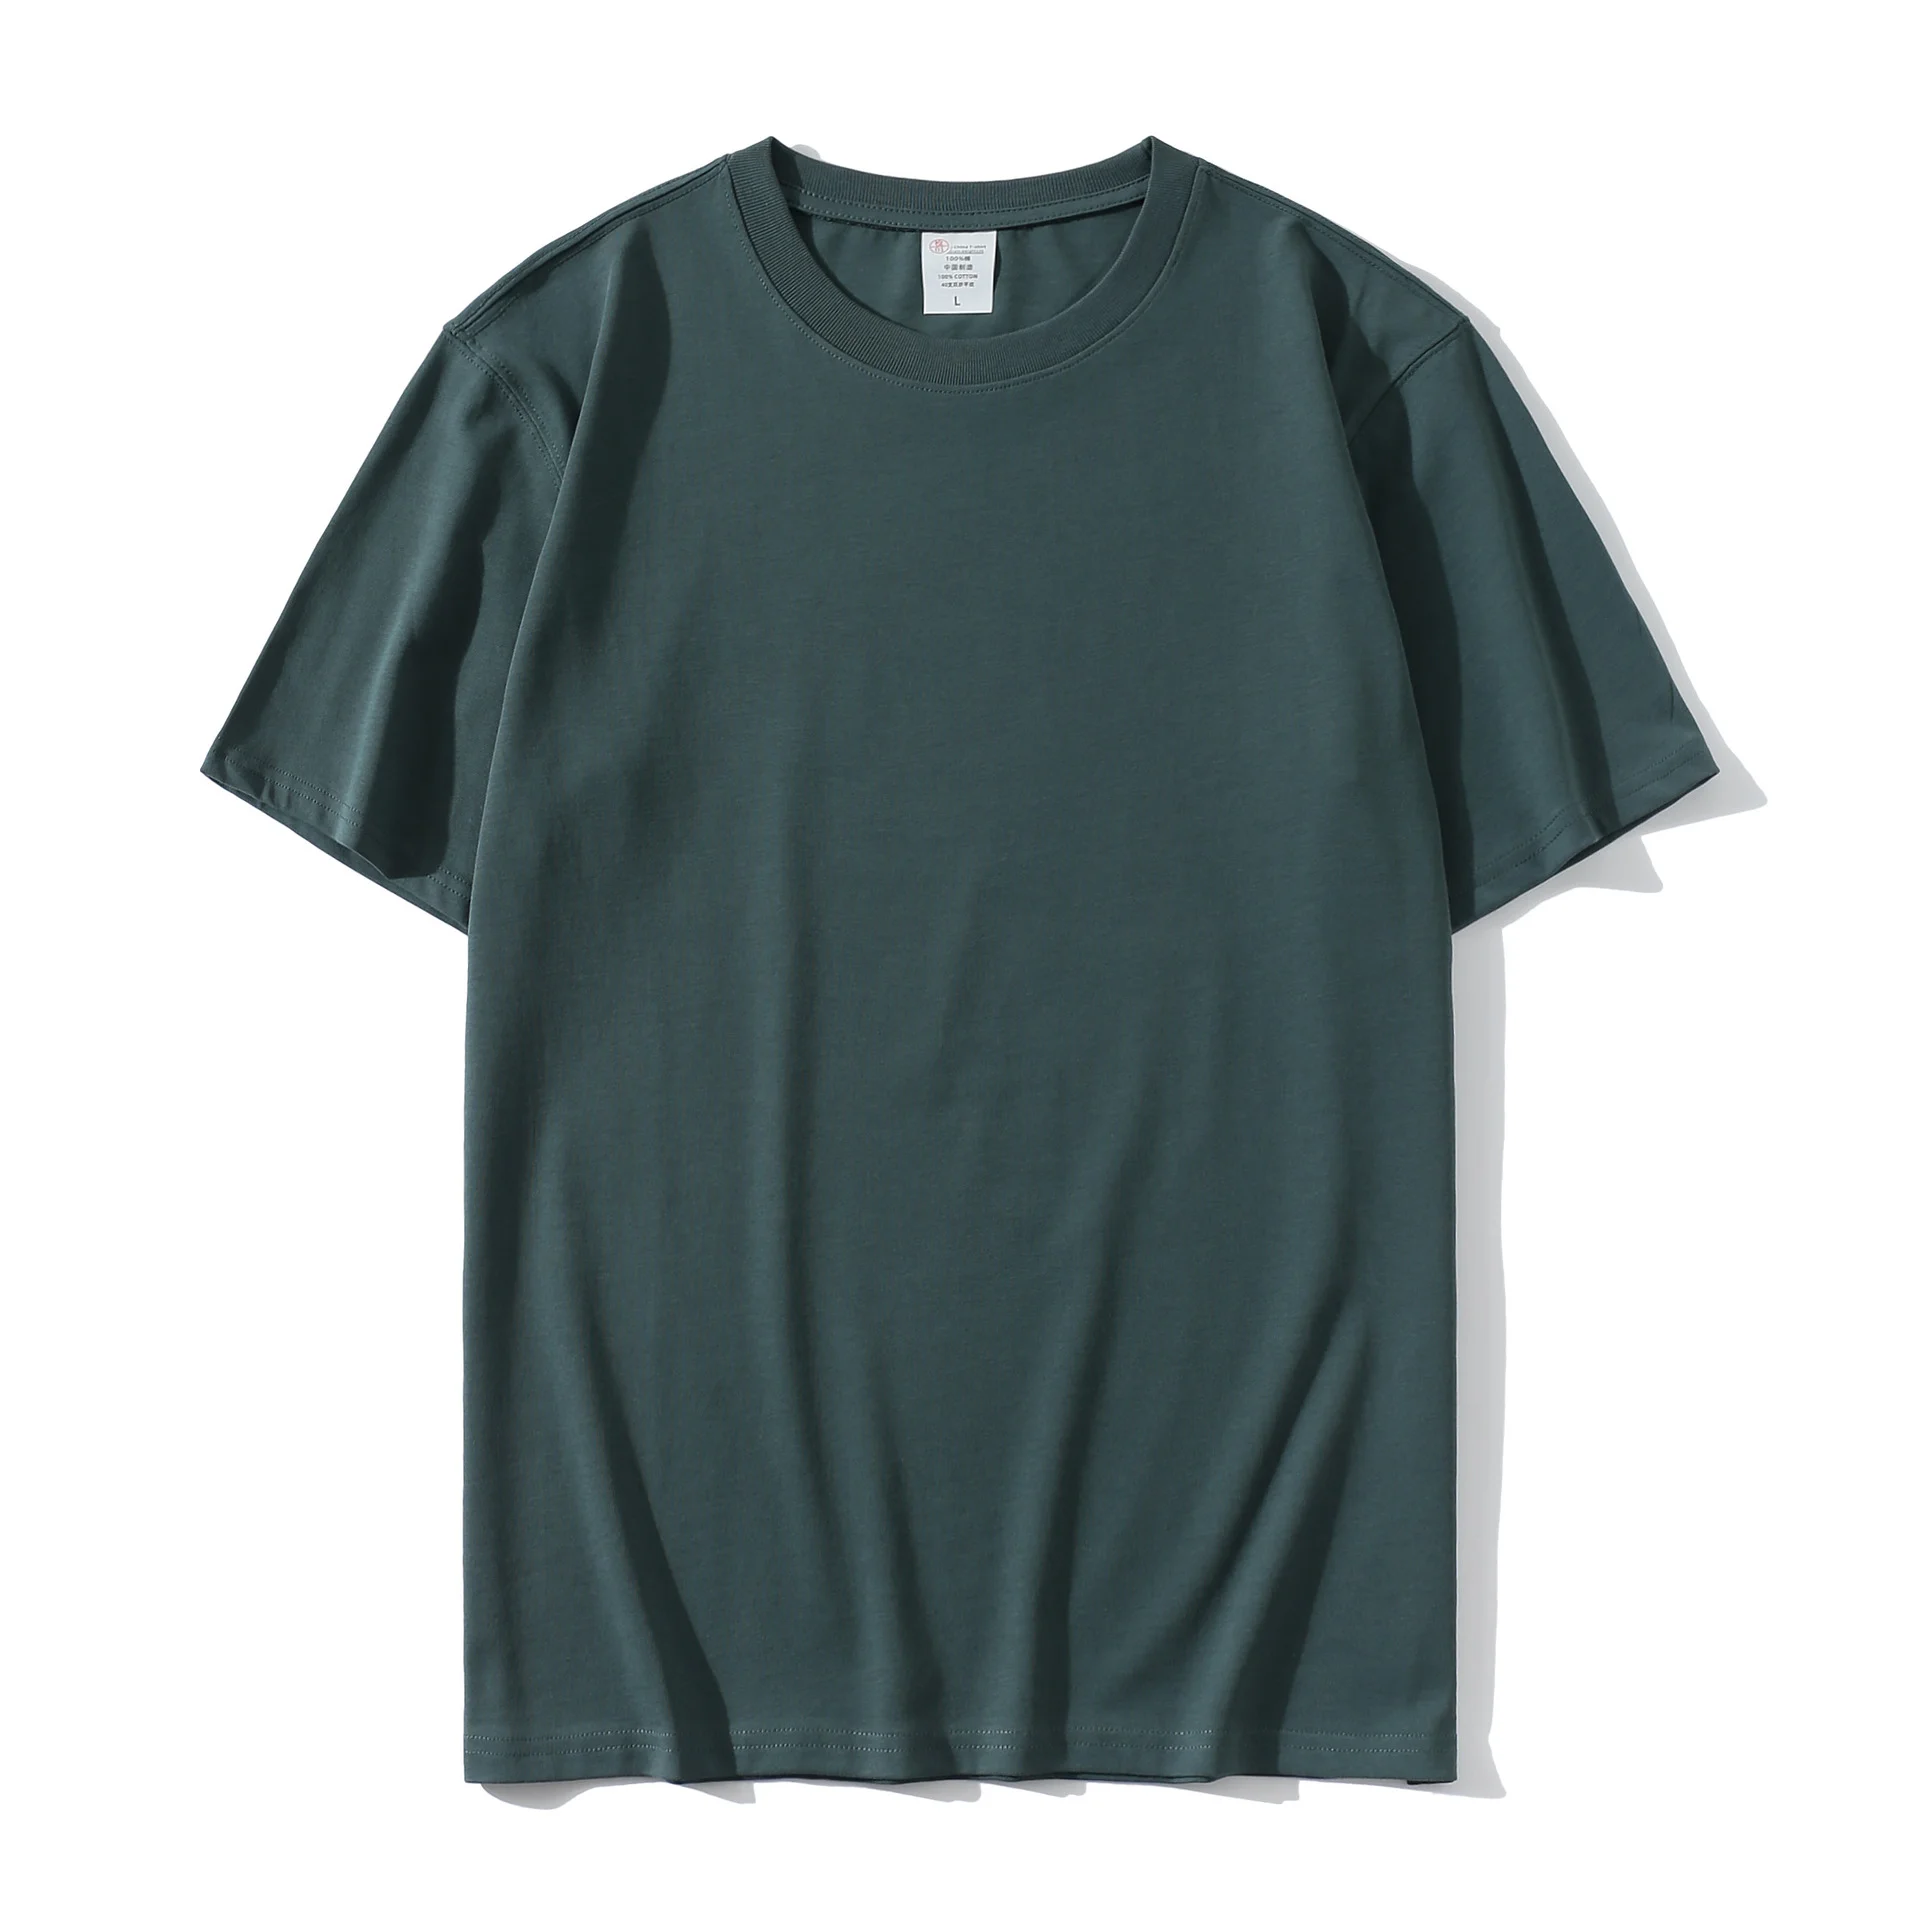 Wholesale Blank T shirts for Printing in United States